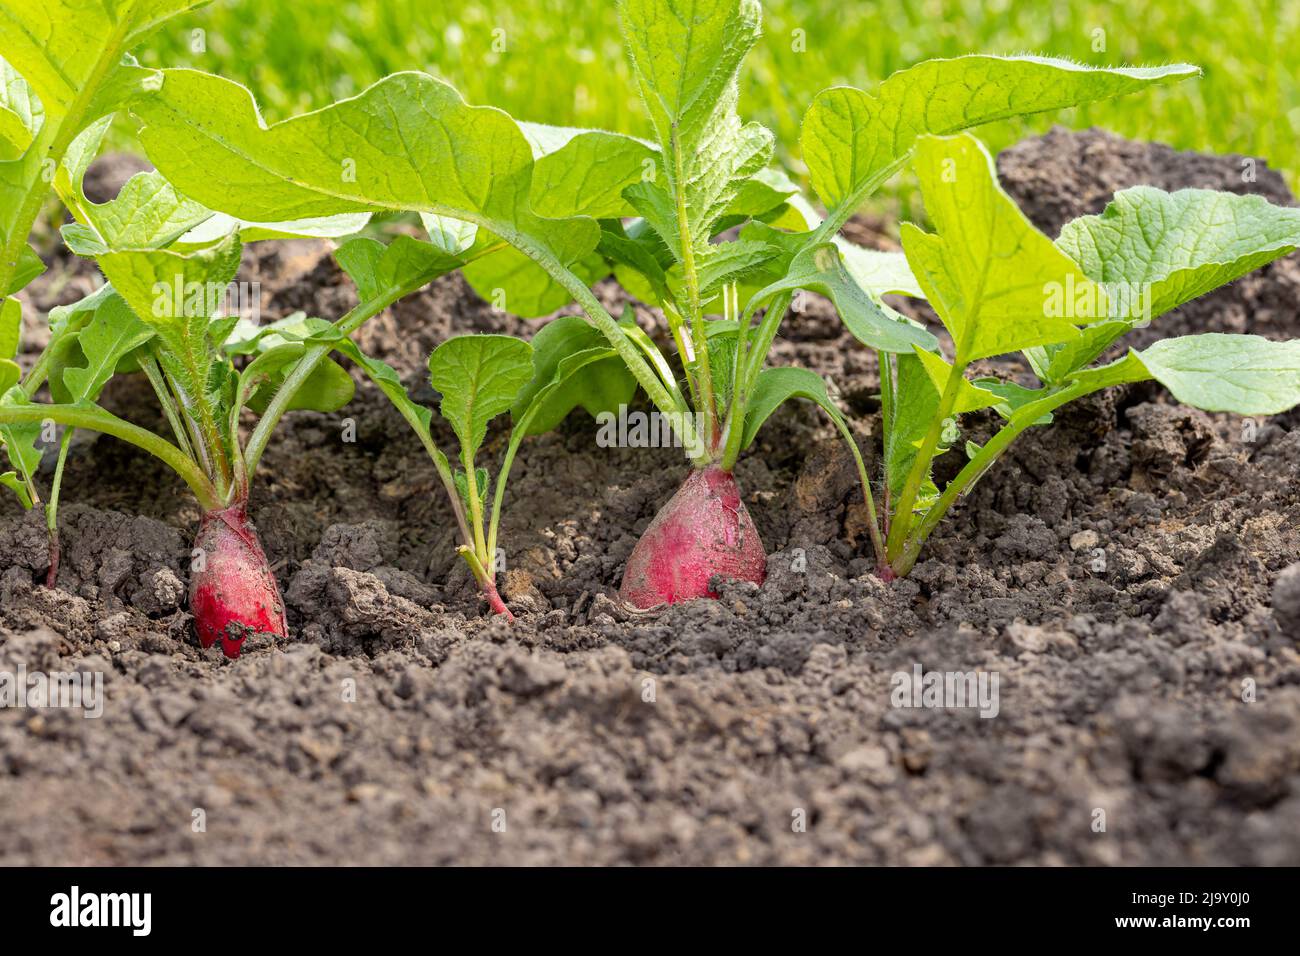 Ripe Radish plants growing in garden. Gardening, organic vegetables and agriculture concept. Stock Photo